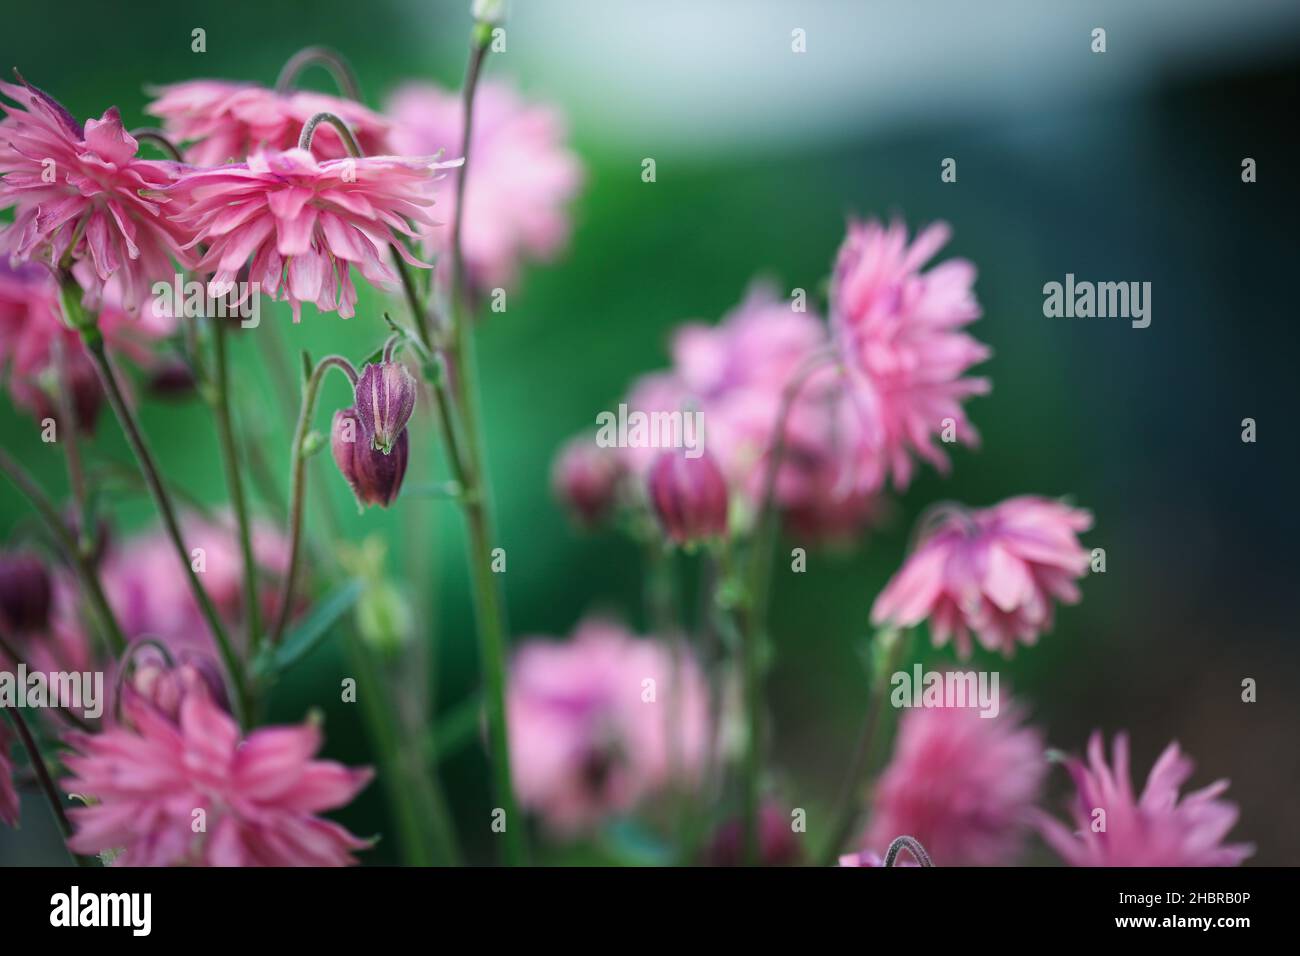 Abstract of beautiful Aquilegia vulgaris 'Clementine Salmon-Rose' blossoms in the flower garden. Selective focus on center bud with blurred foreground Stock Photo